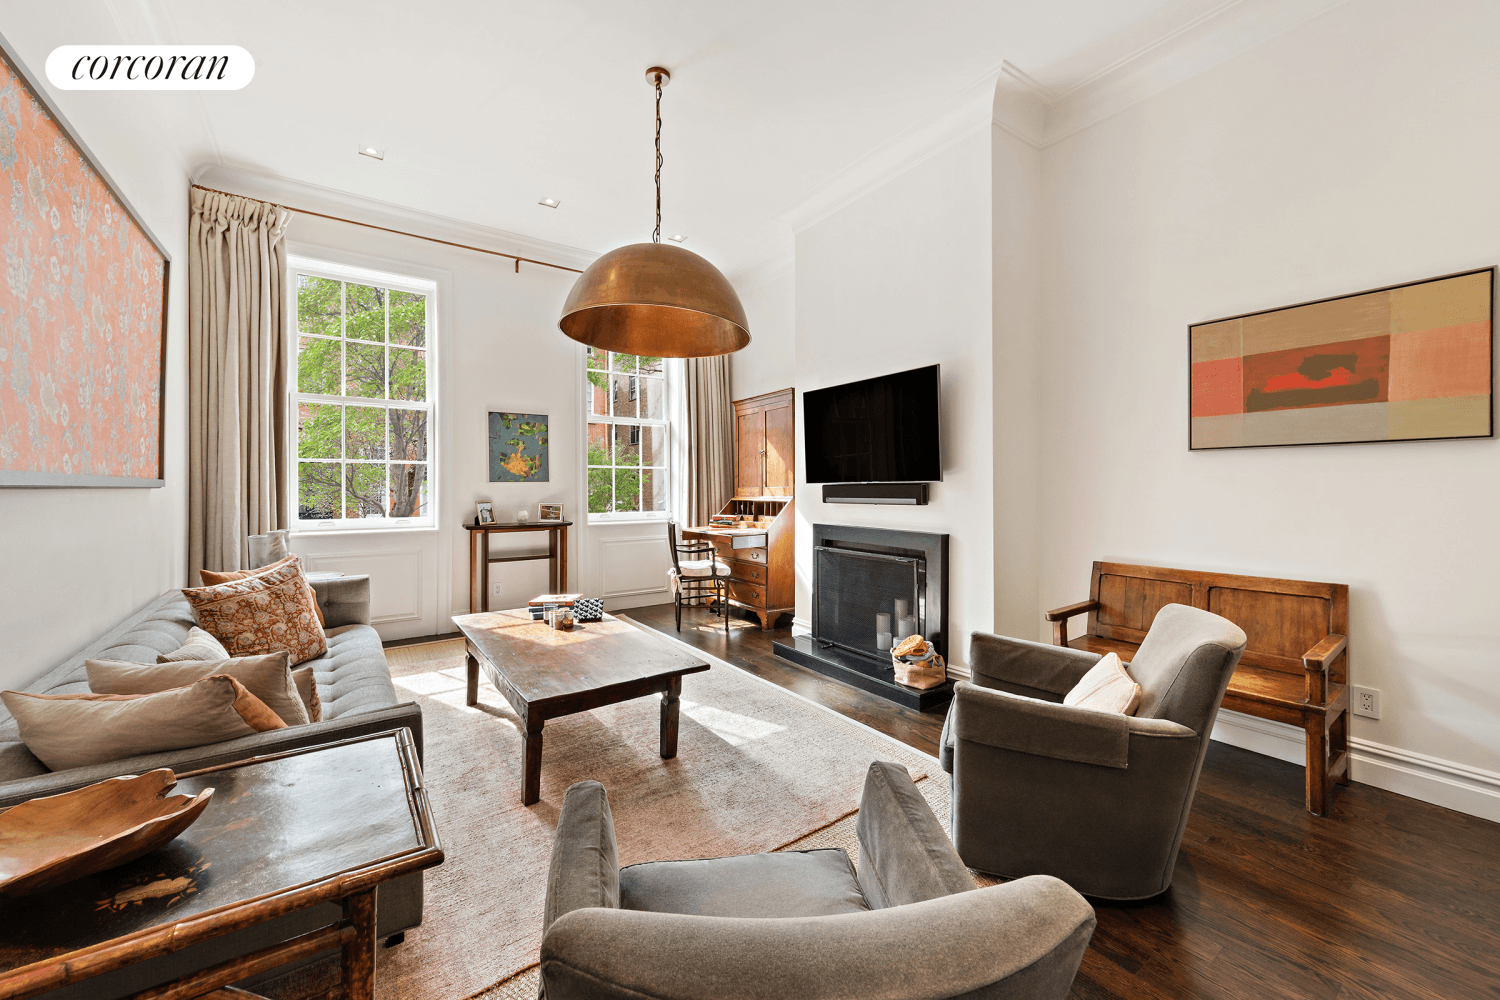 Located mid block on one of the Chelsea Historic District's most distinctive townhouse streets, this meticulous Parlor Floor two bedroom and two bathroom home offers 12' ceilings, a wood burning ...